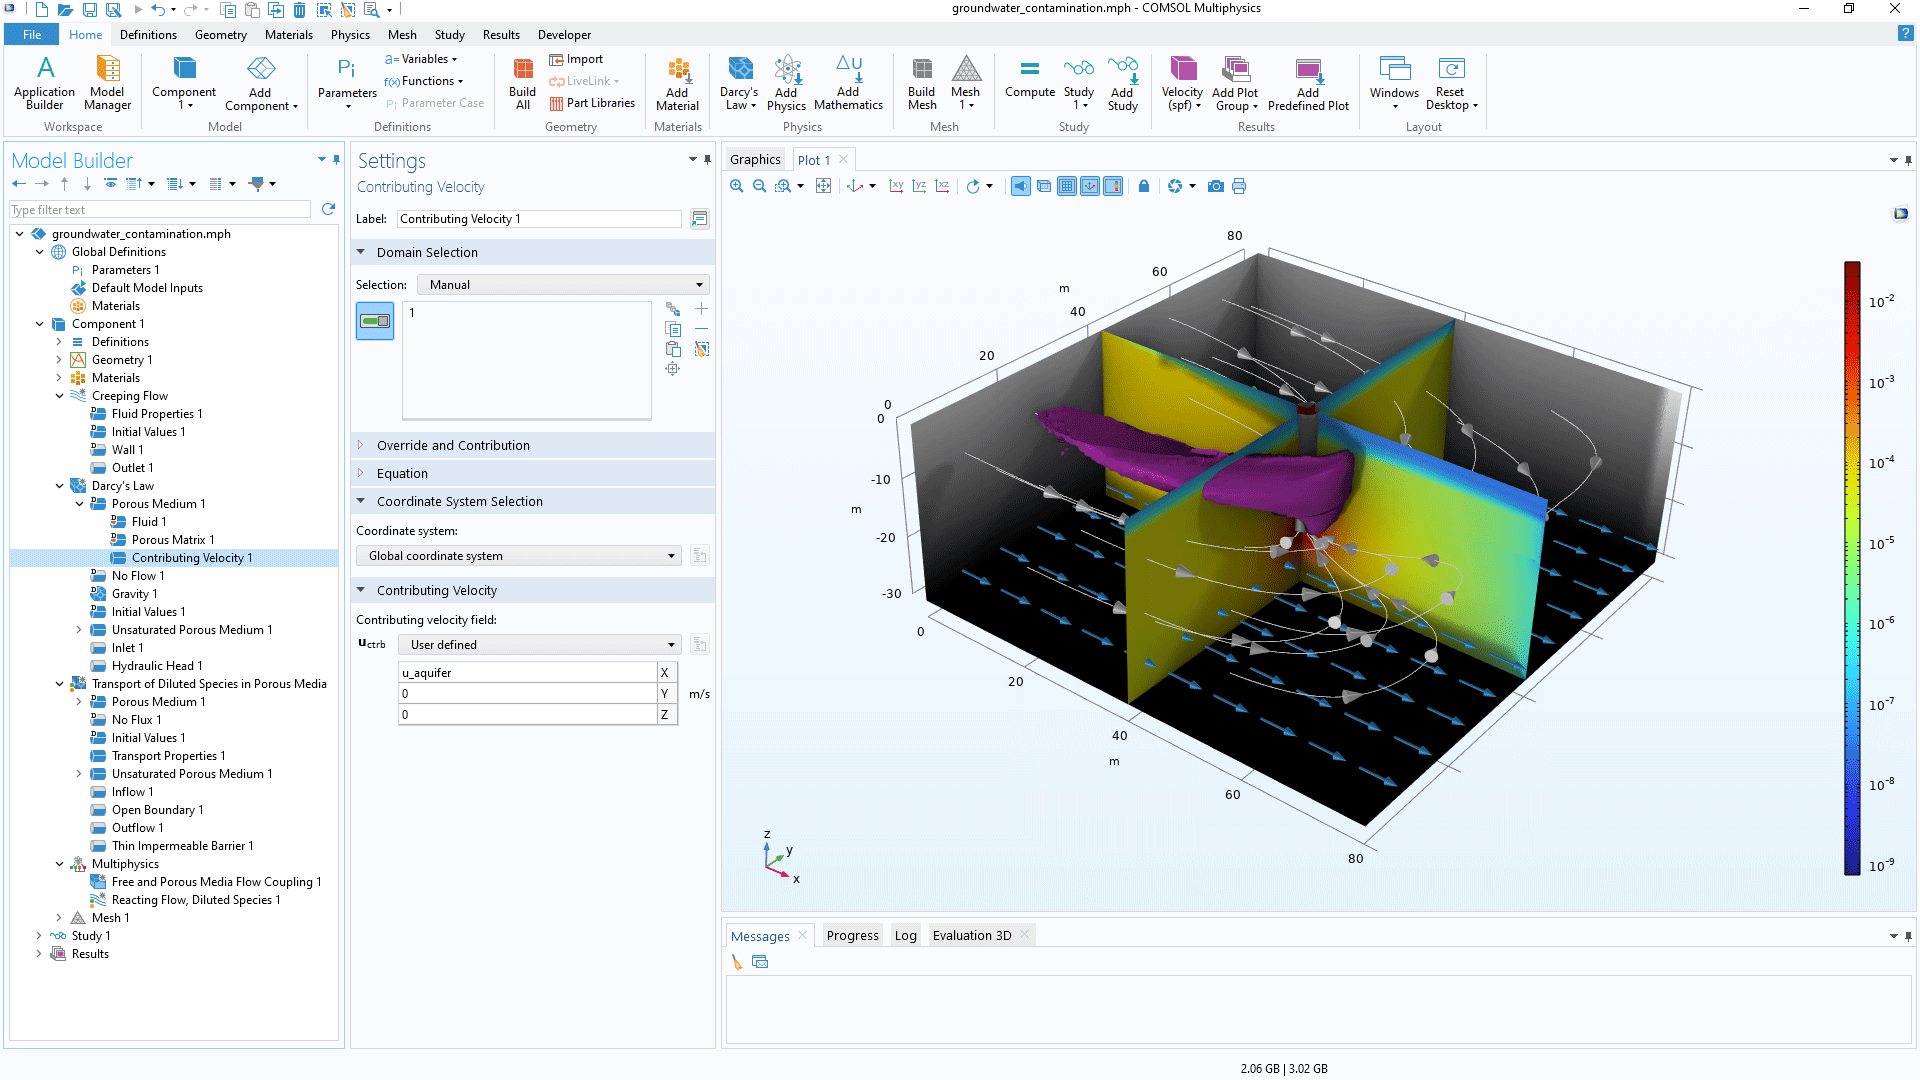 The COMSOL Multiphysics UI showing the Contributing Velocity node highlighted, the corresponding Settings window, and the Modeling Groundwater Contamination model in the Graphics window.